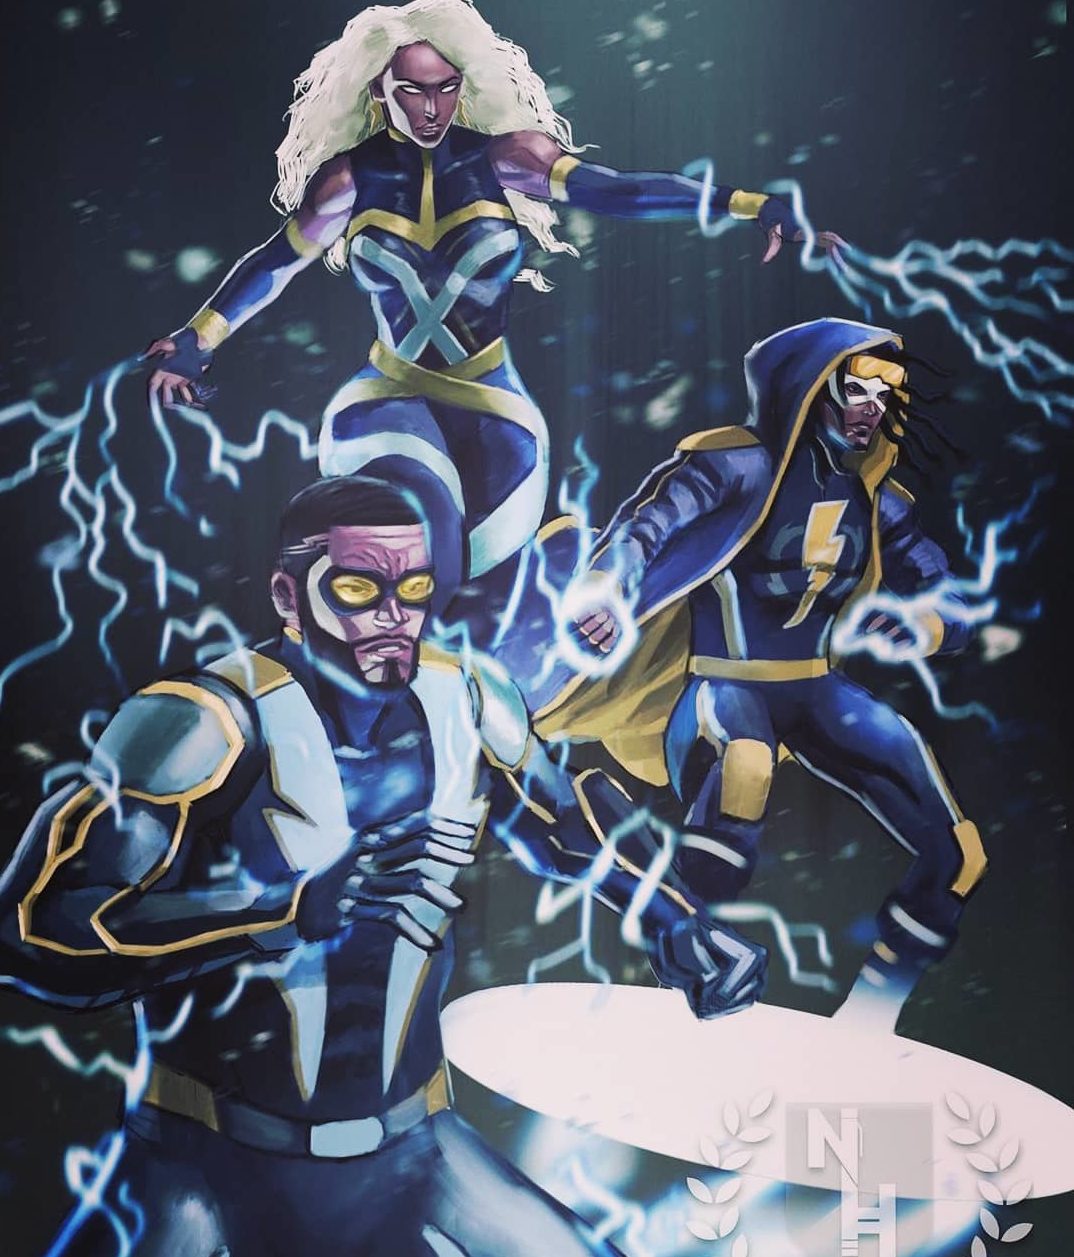 Storm⚡Black Lightning ⚡Static Shock ⚡Why isnt this a series already Artwork by @natehdsnart TuesdayVibes Tue.jpg